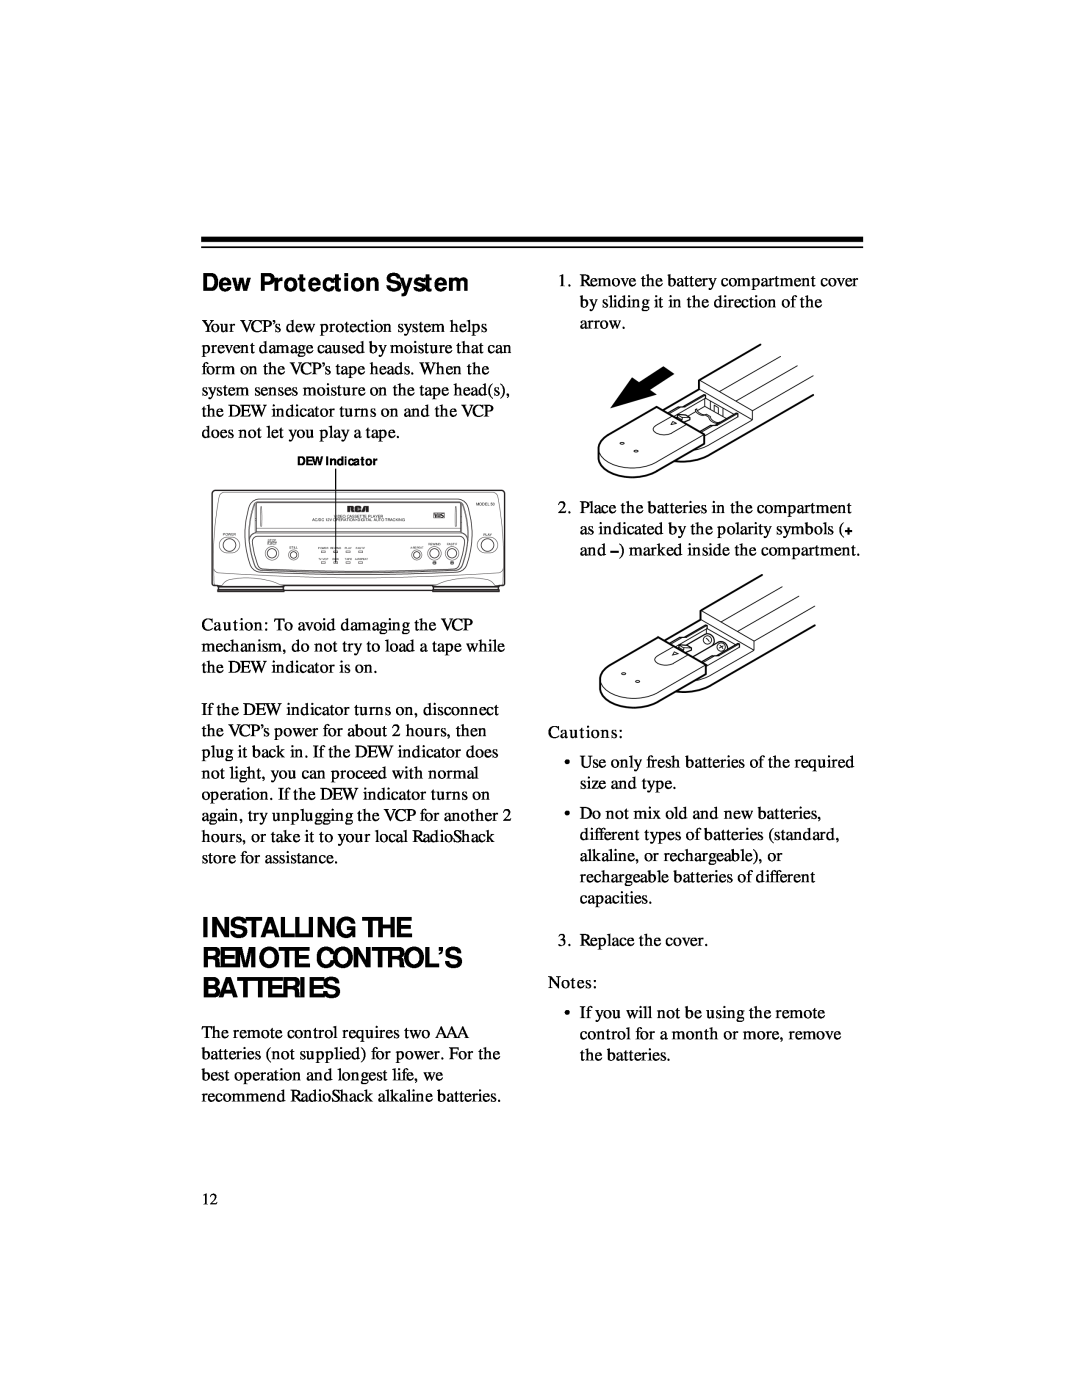 RCA 50, 40 owner manual Dew Protection System, Installing The Remote Control’S Batteries 